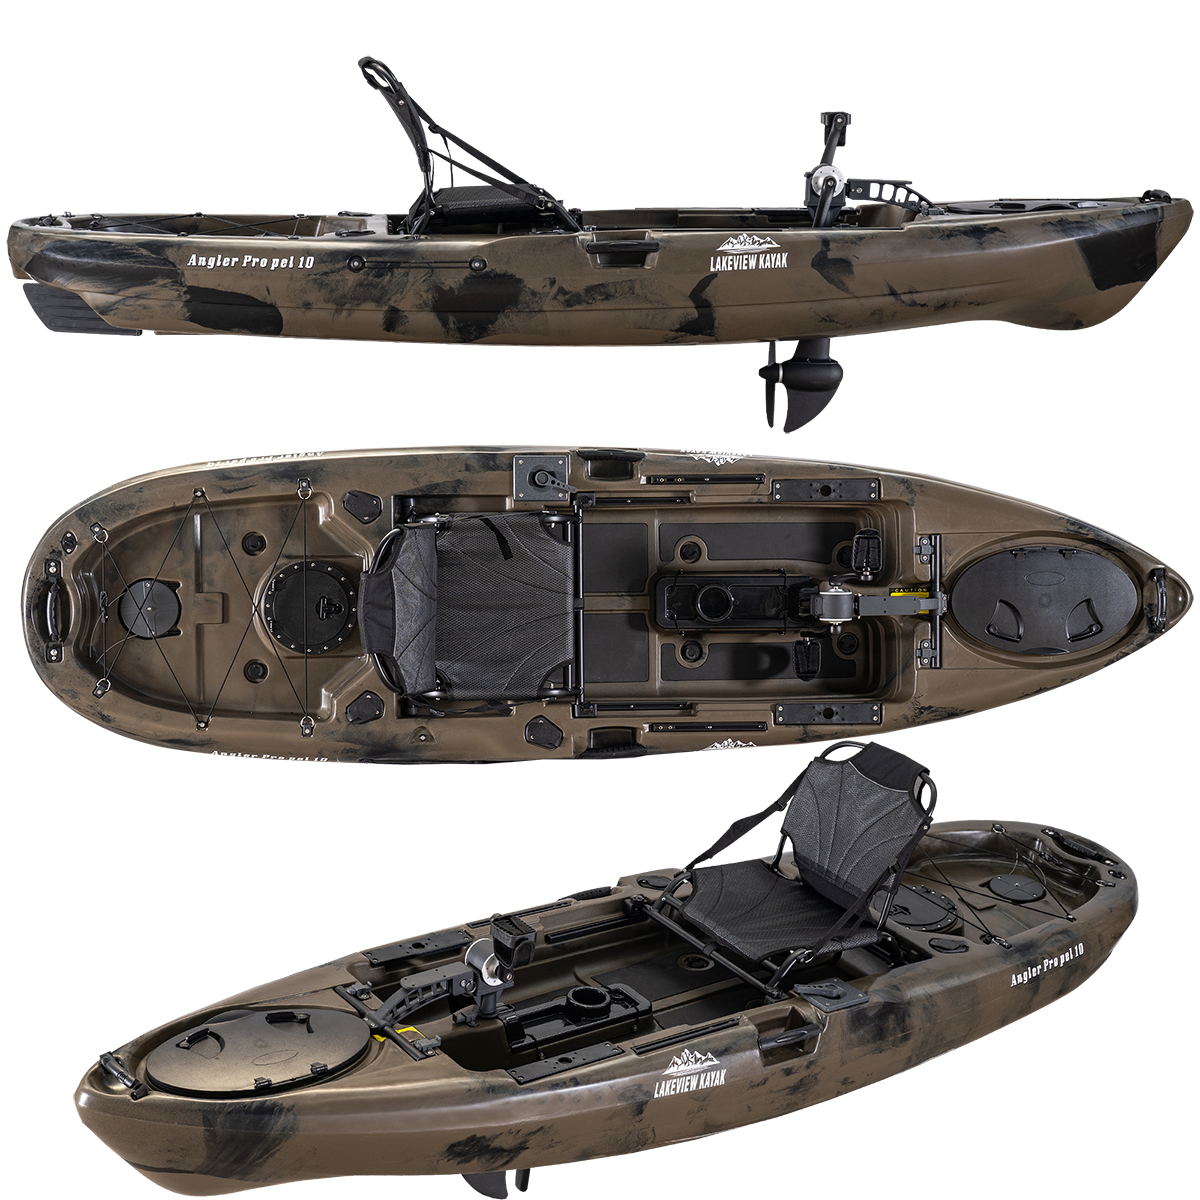 Angler Propel 10 Pedal Drive Kayak with rudder system – Lakeview